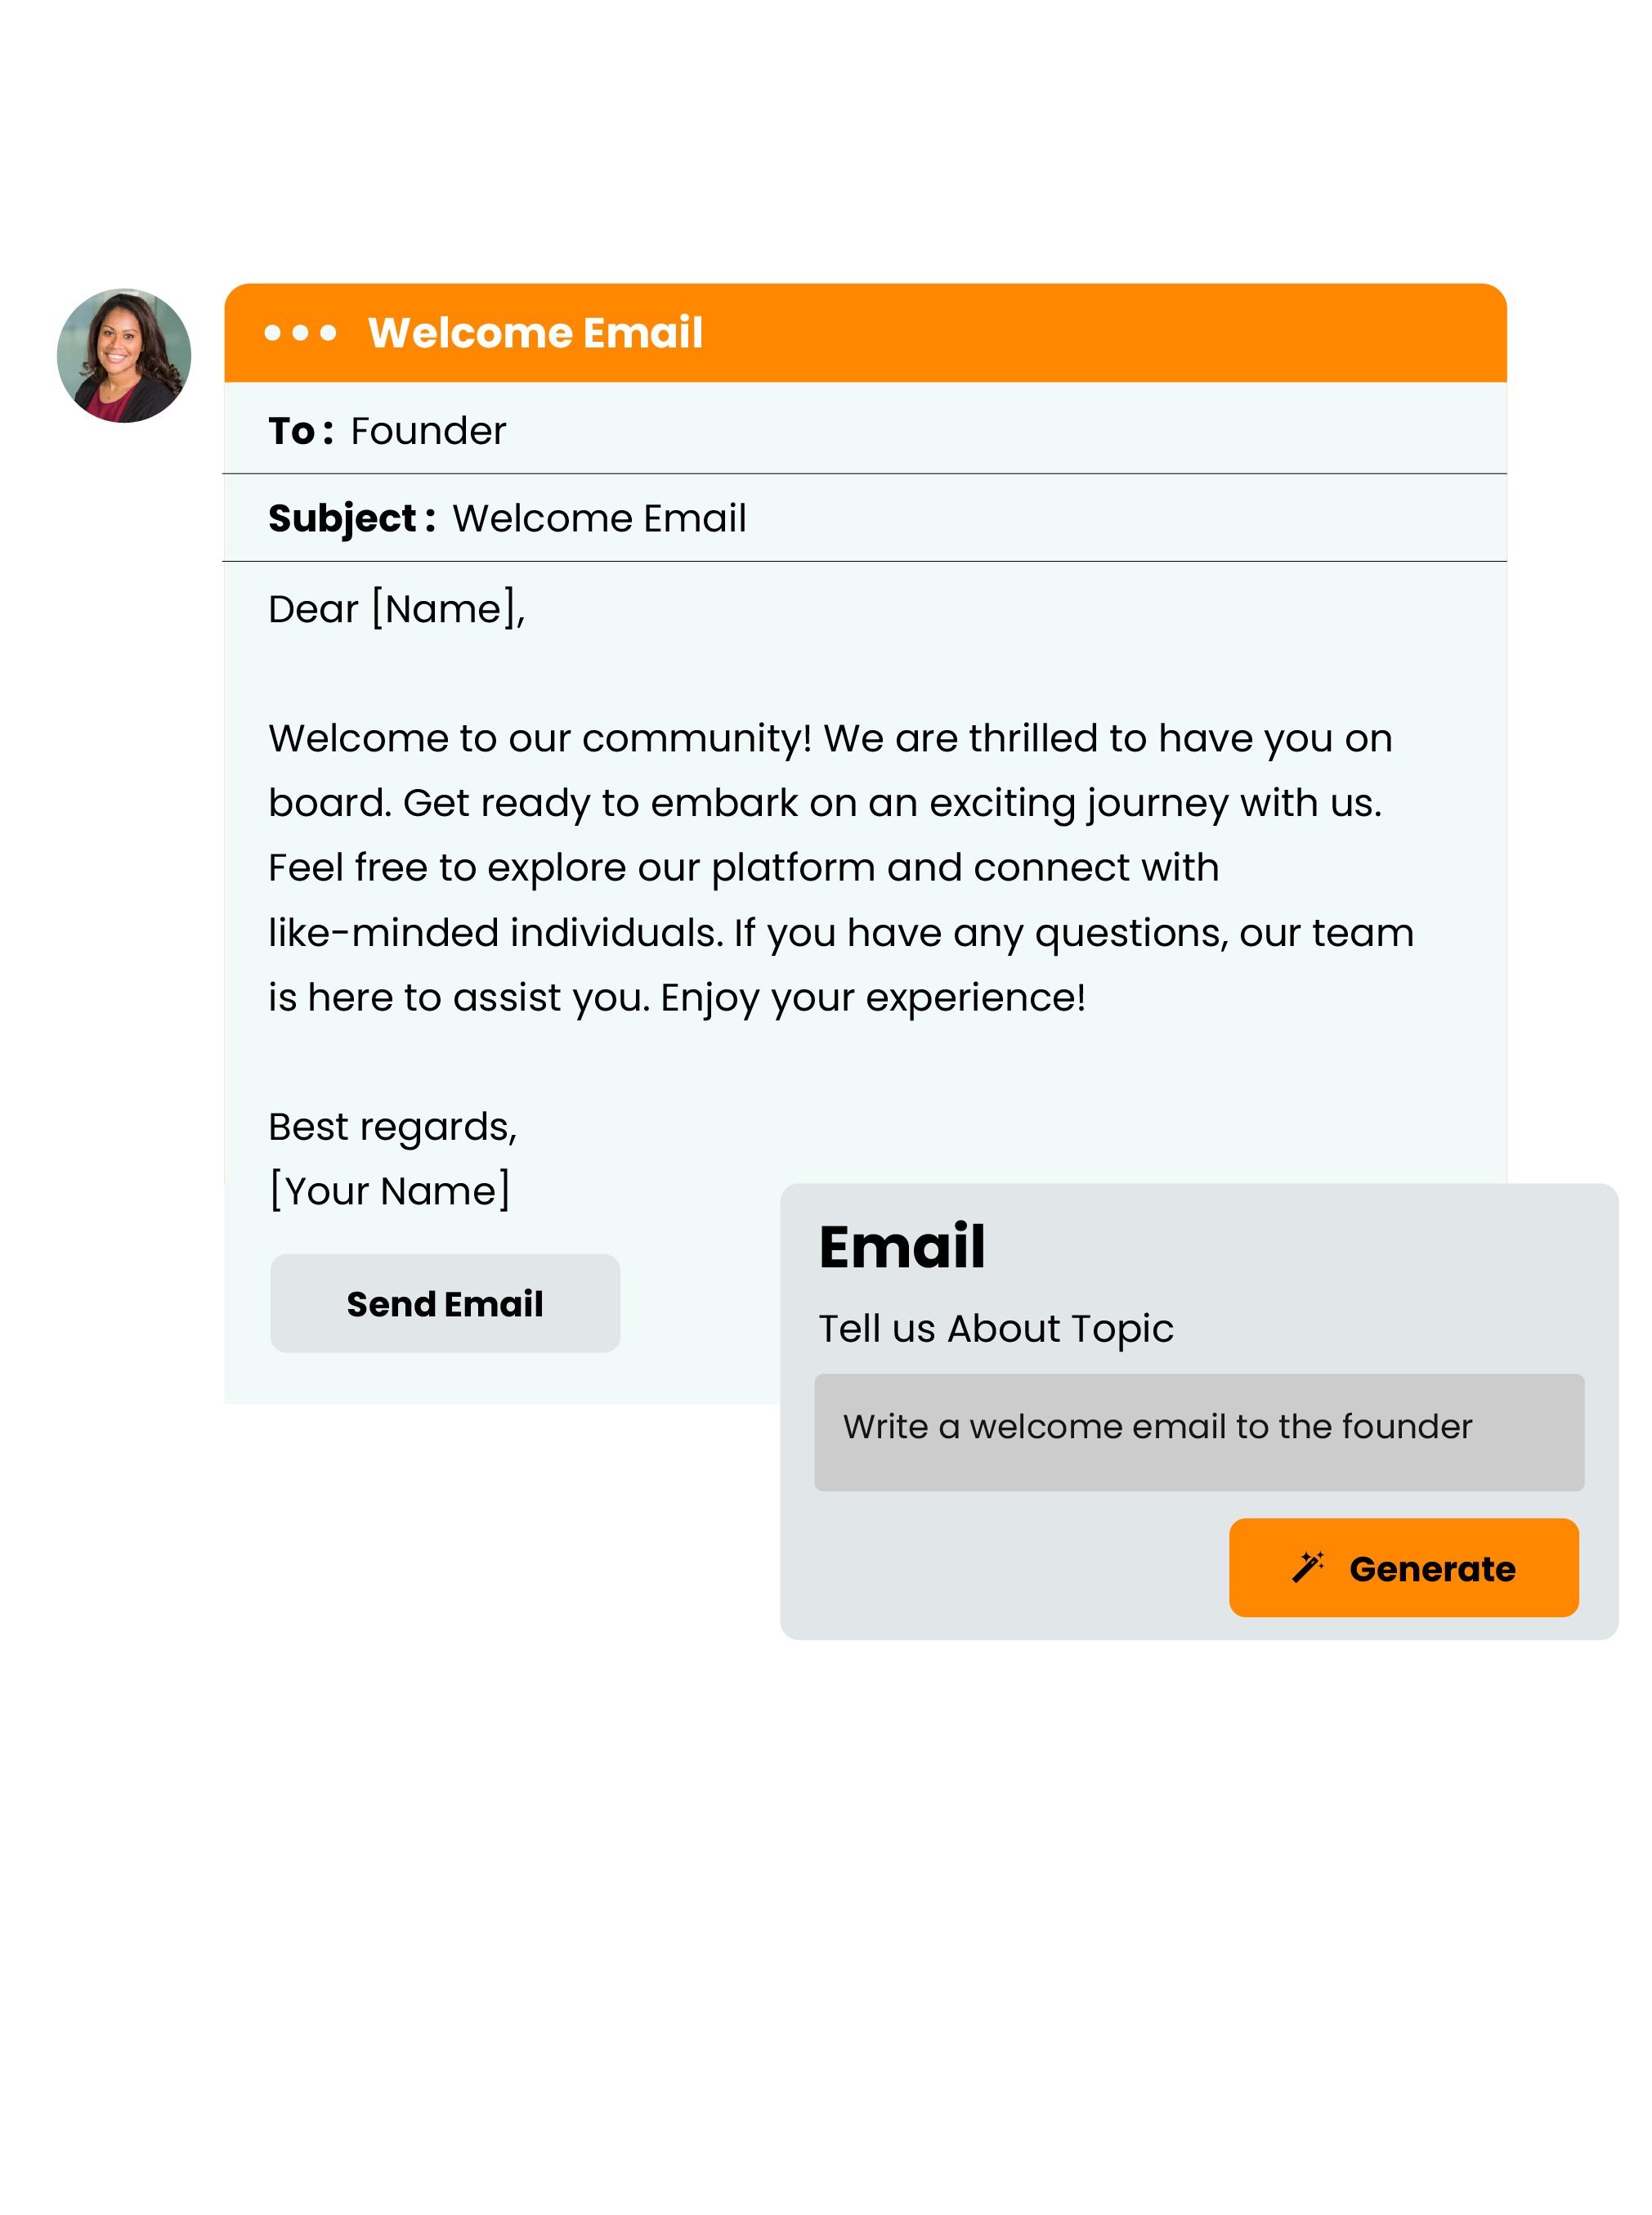 ETTVI’s AI Get Welcome Email Tool